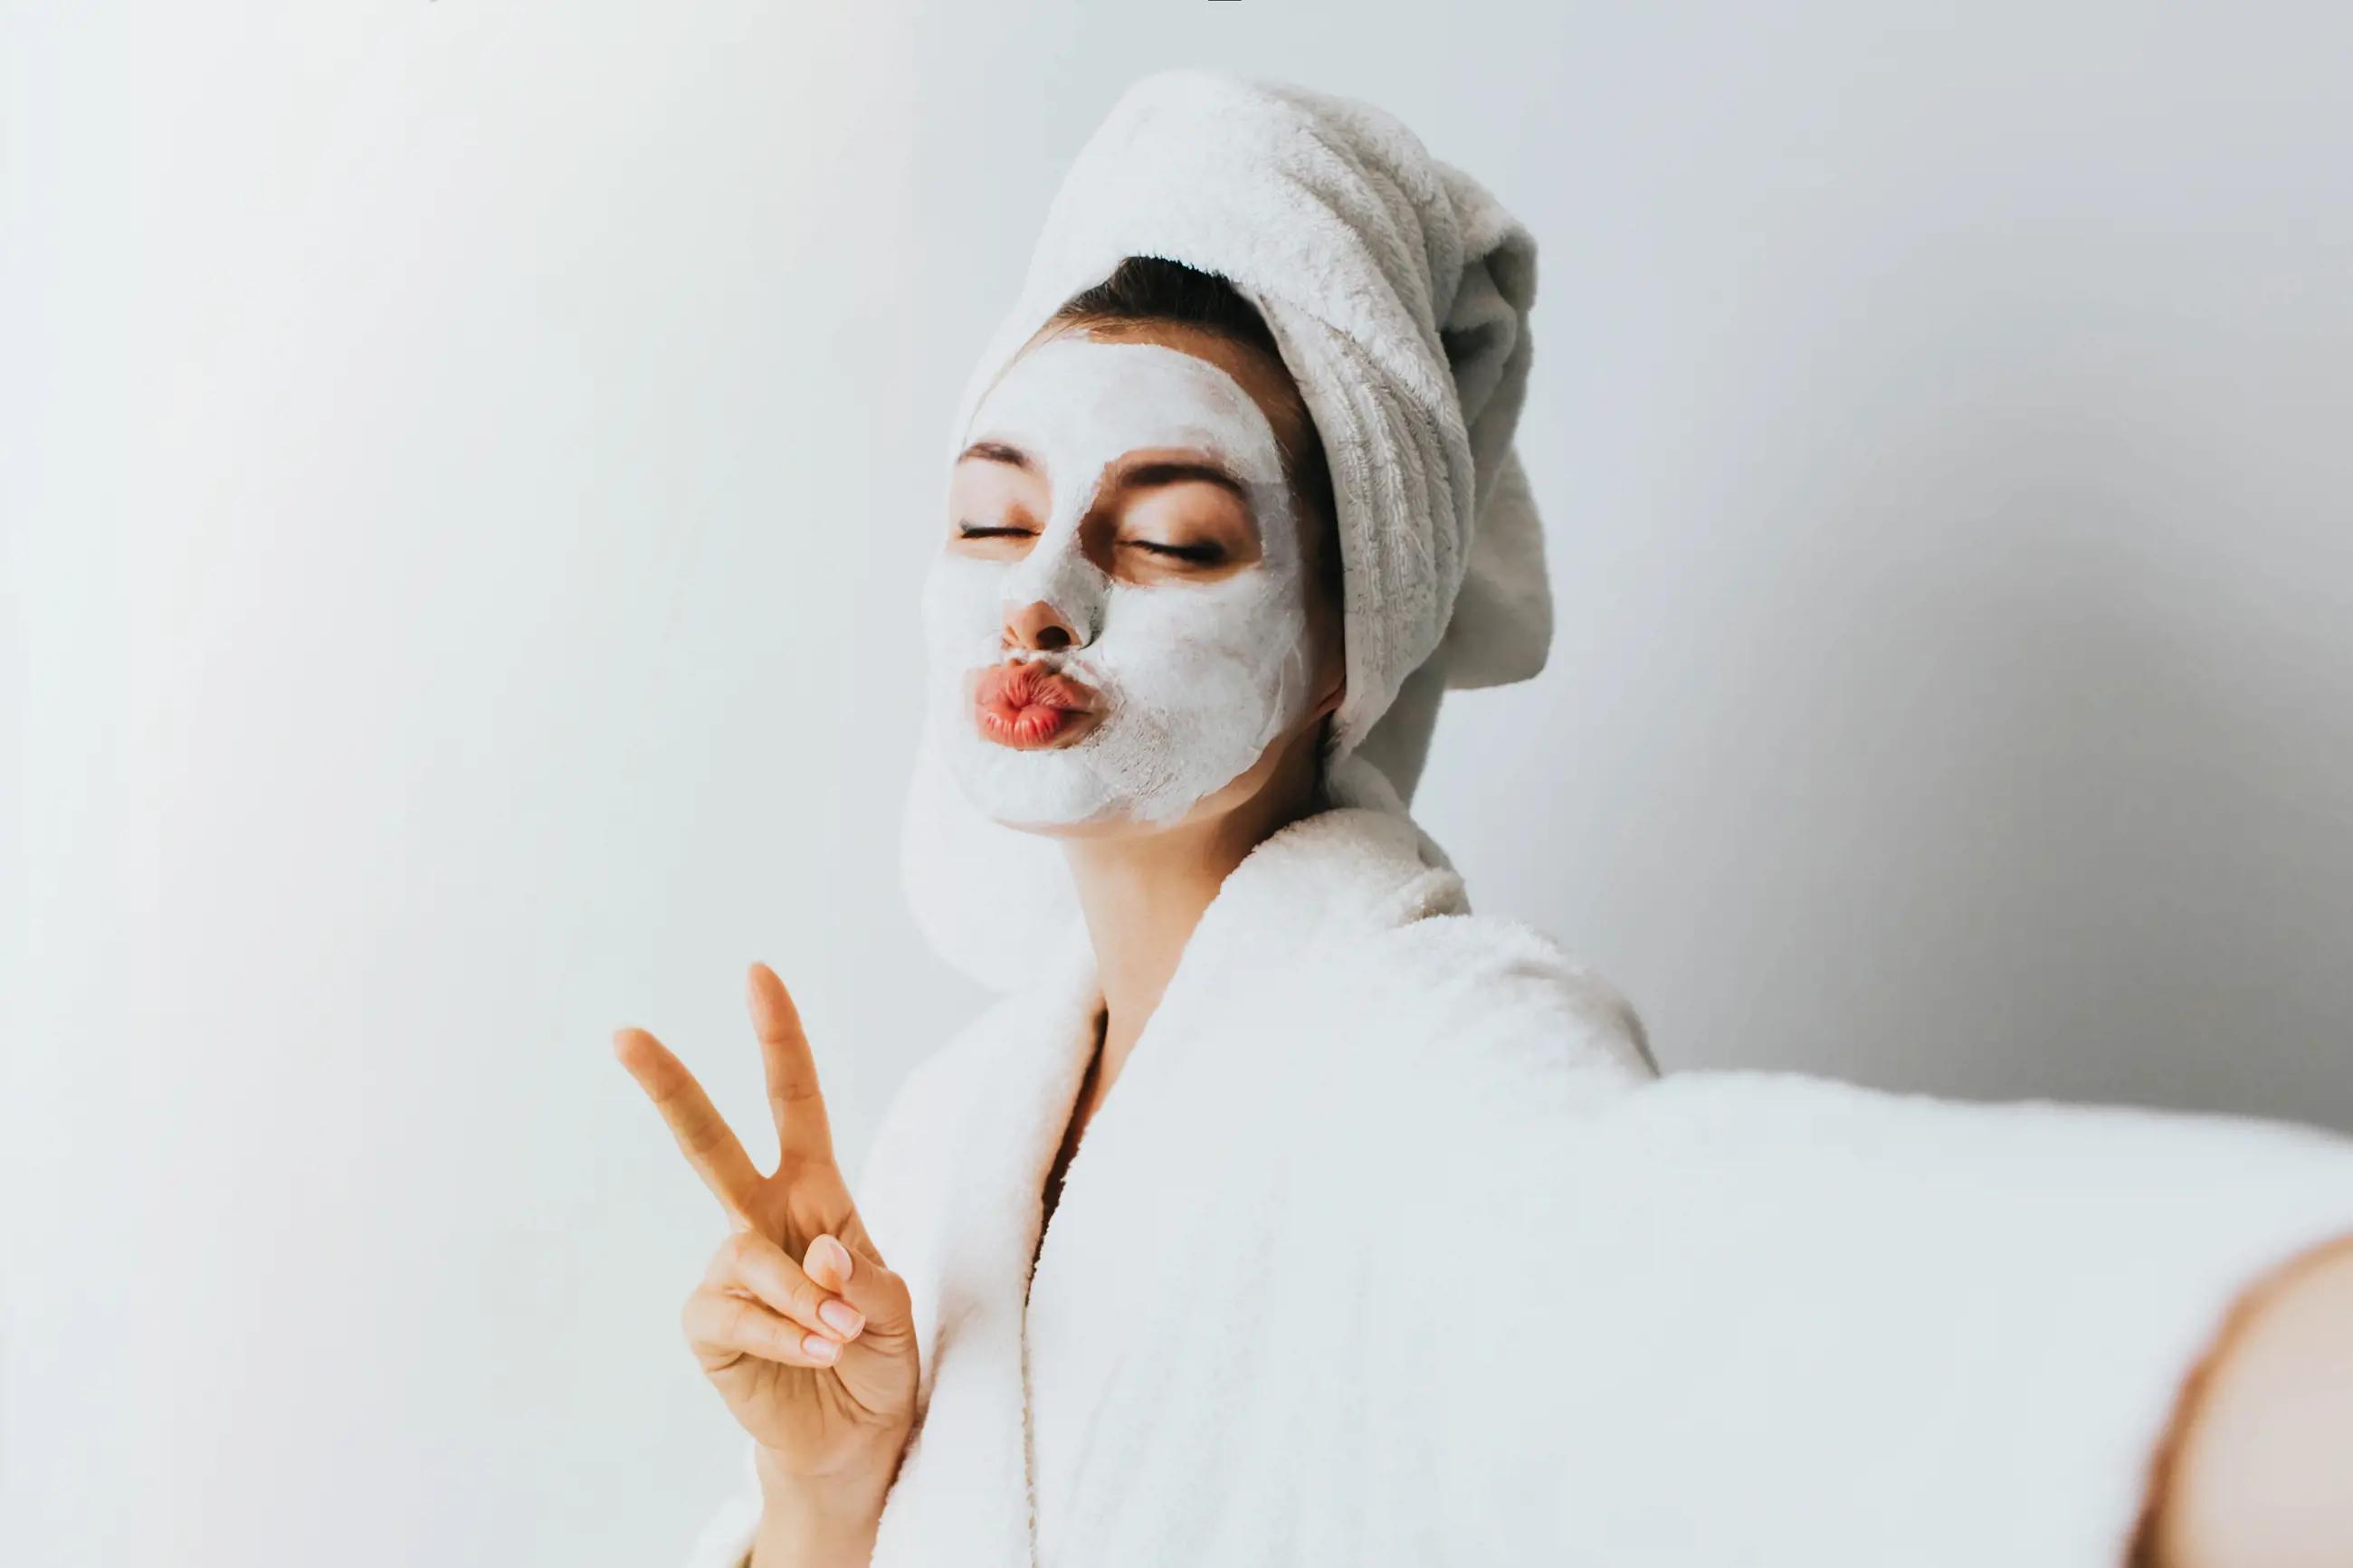 Hers and His: How to Plan Your Pre-Wedding Self-Care Regimen Image